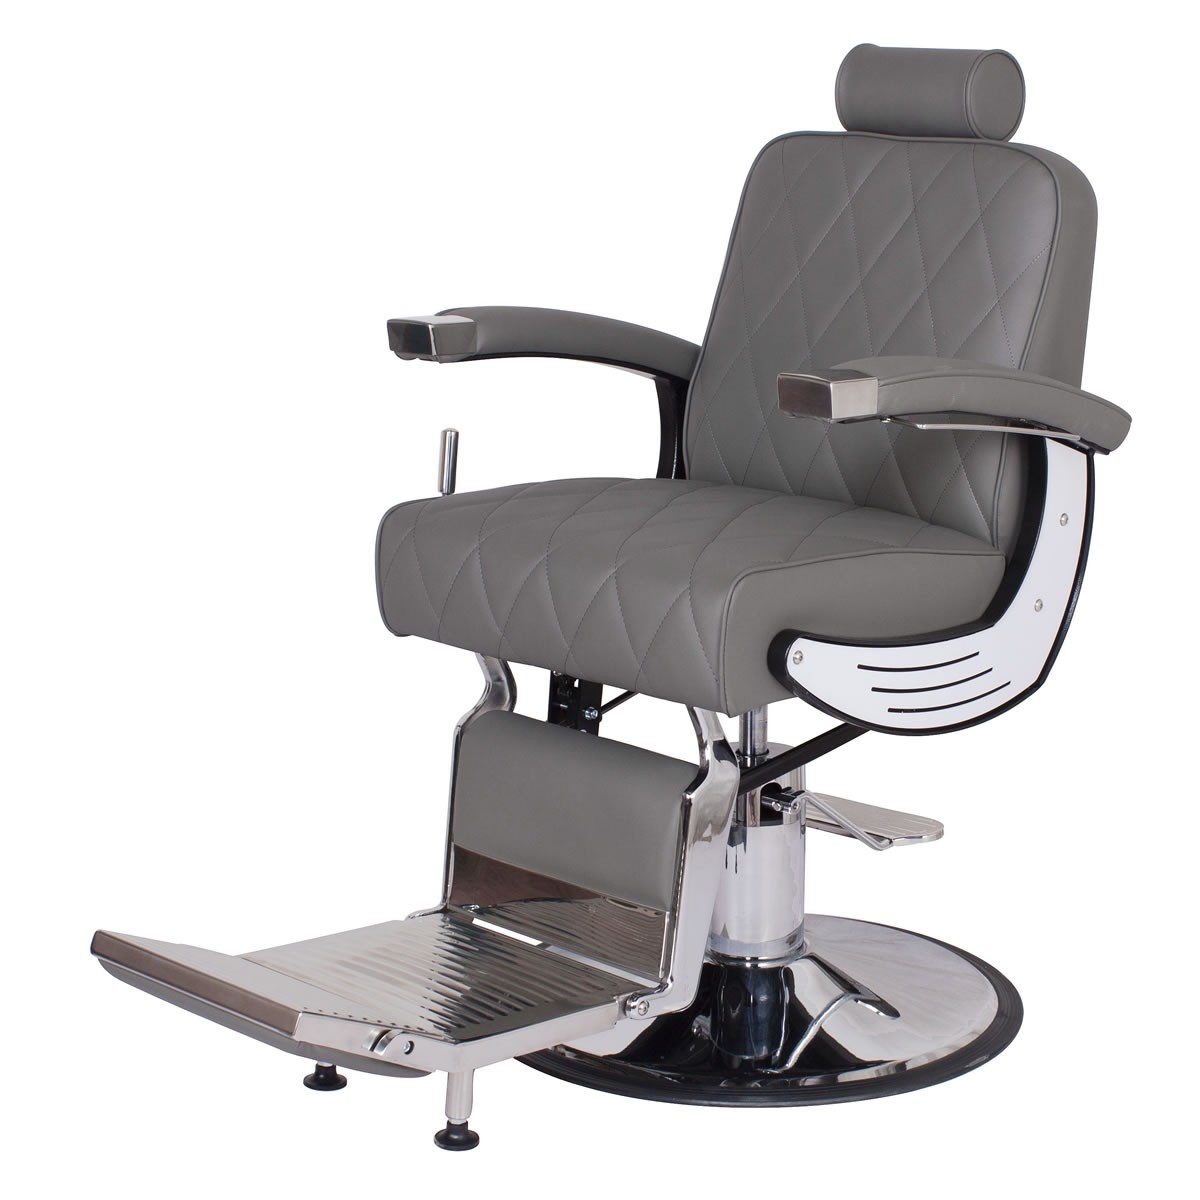 Baron Barber Chair In Grey Grey Barber Shop Chairs Barber